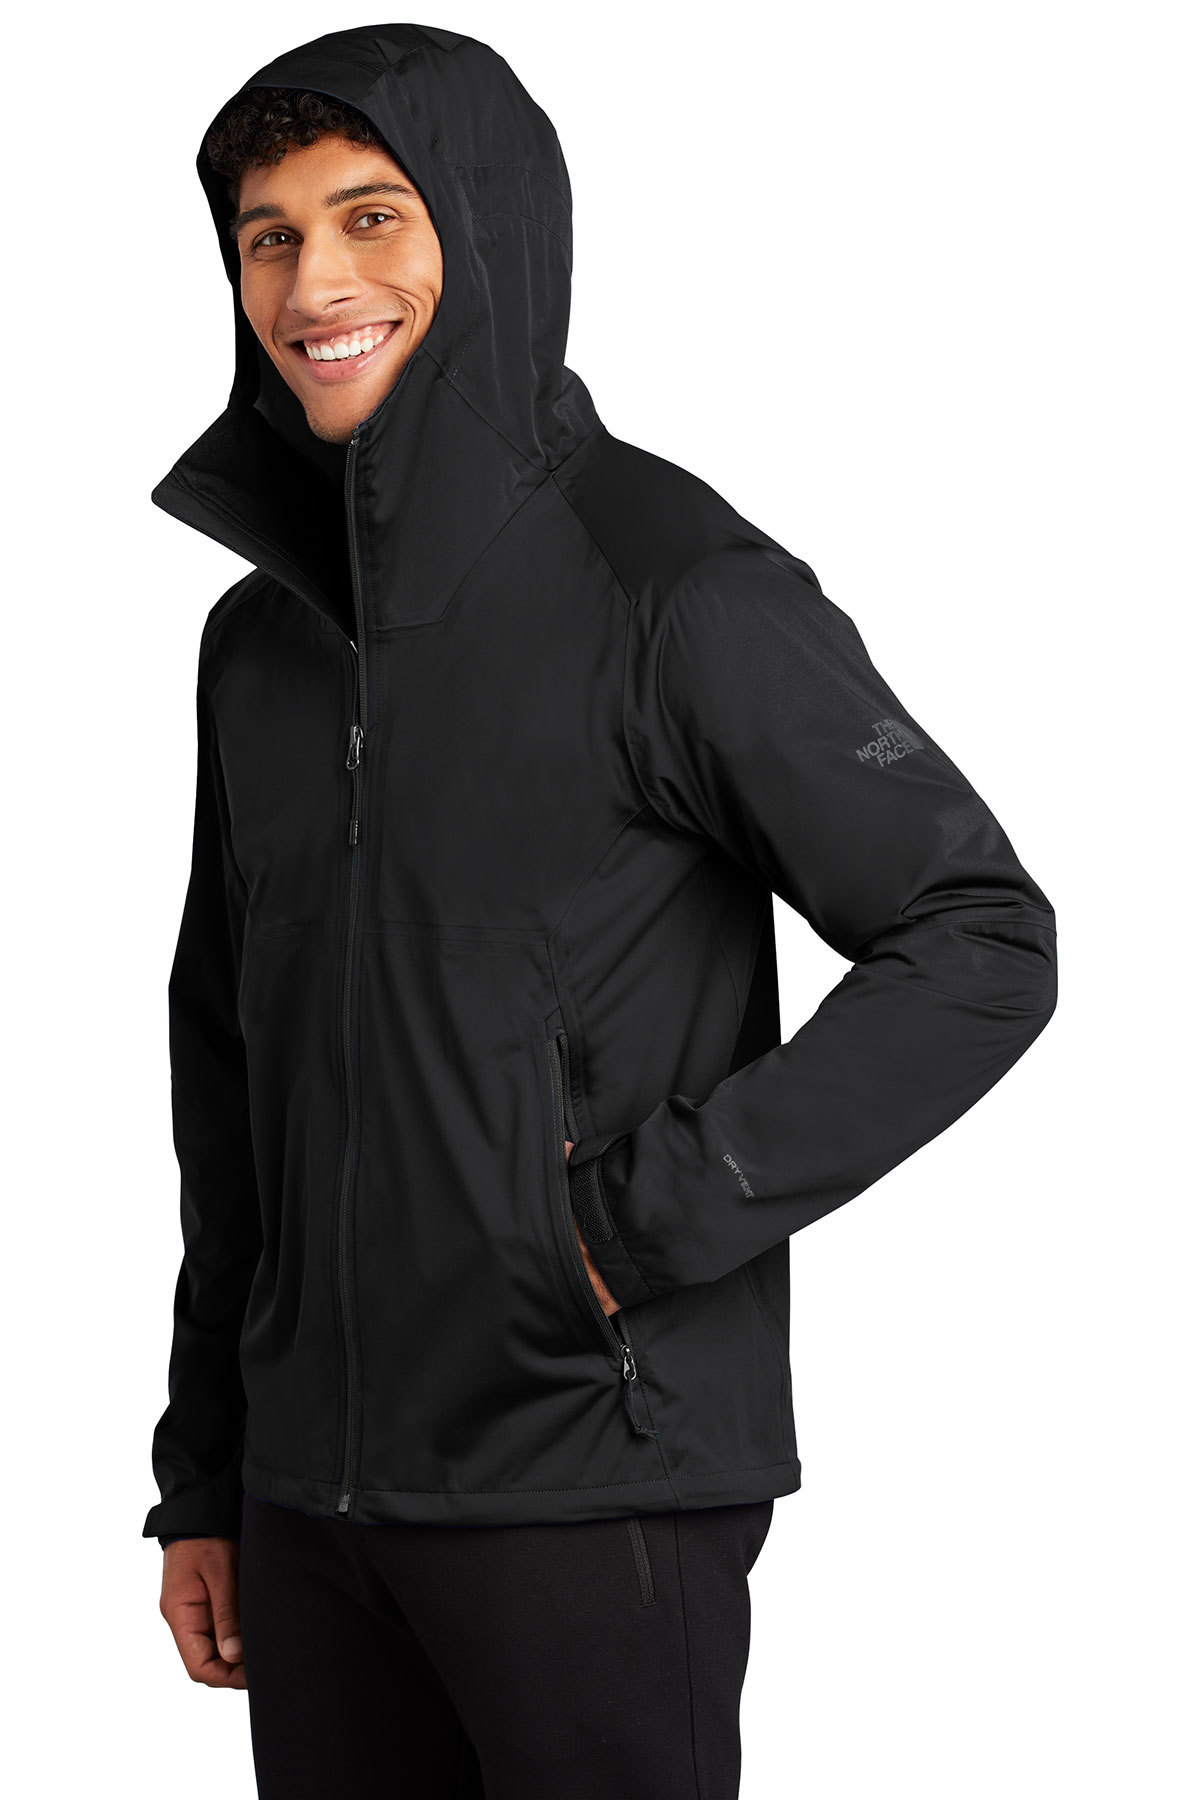 The North Face All-Weather DryVent Stretch Jacket | Product | Company ...